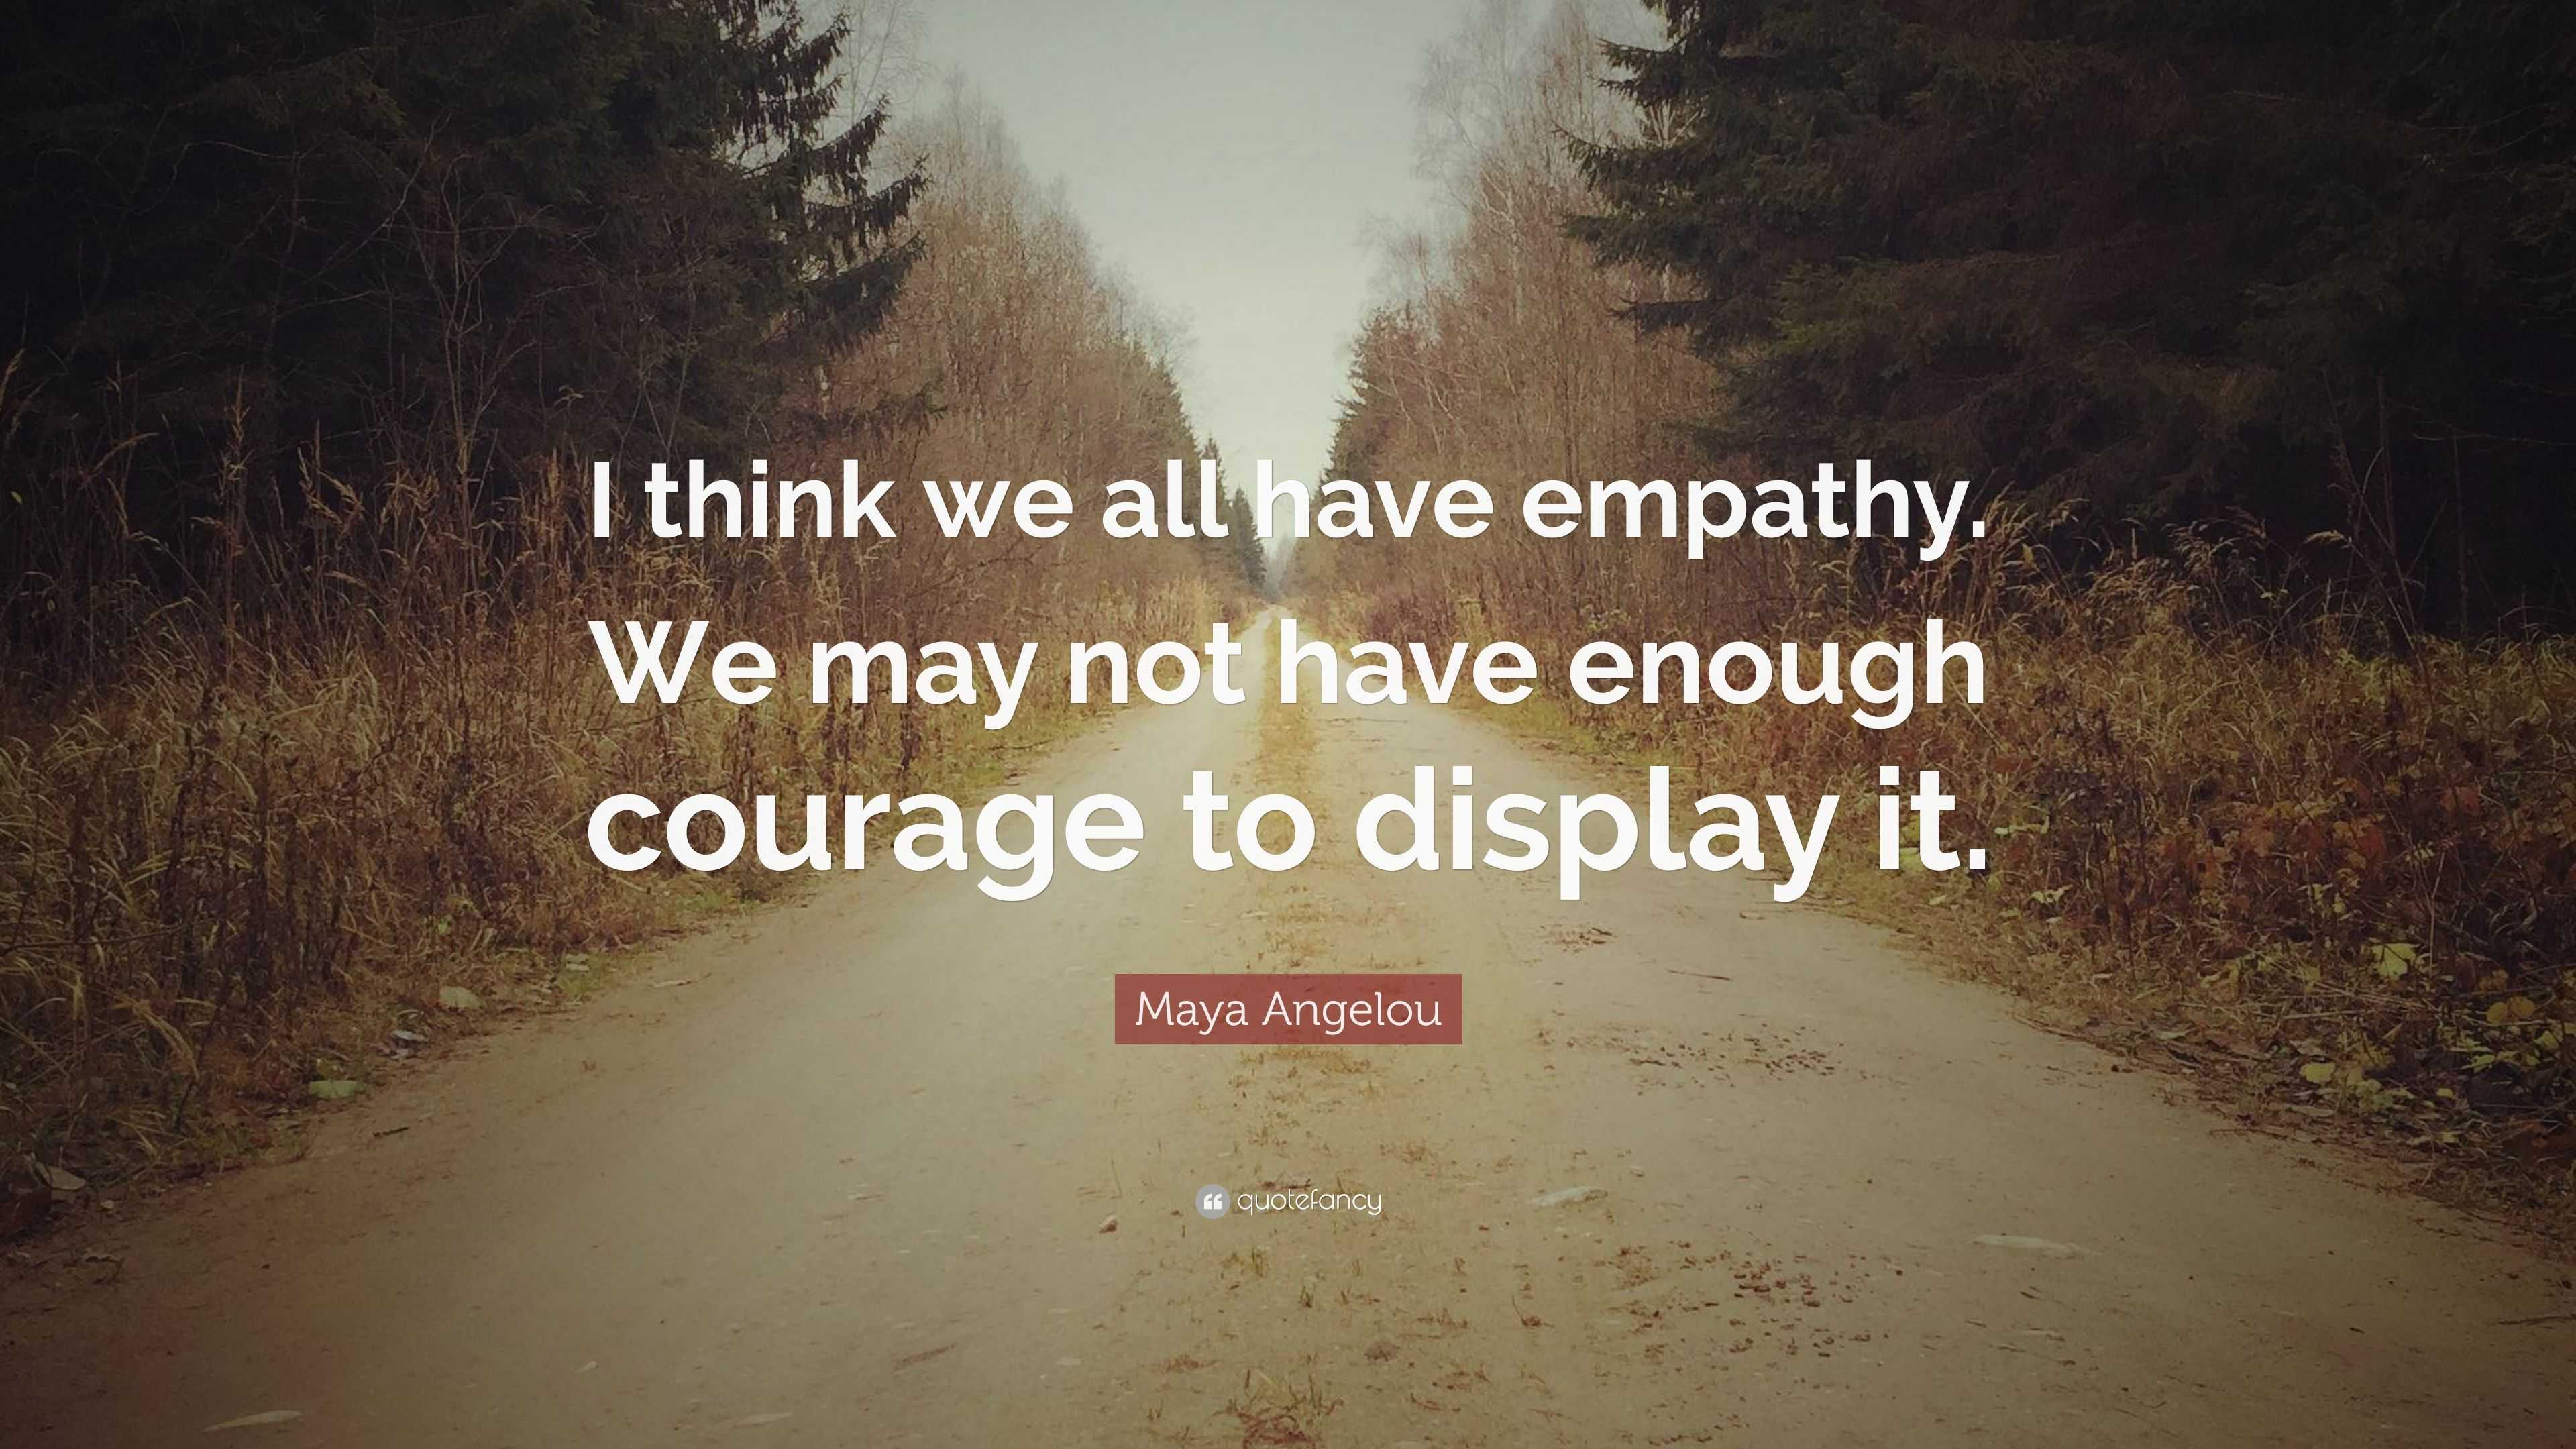 Maya Angelou Quote: “I think we all have empathy. We may not have